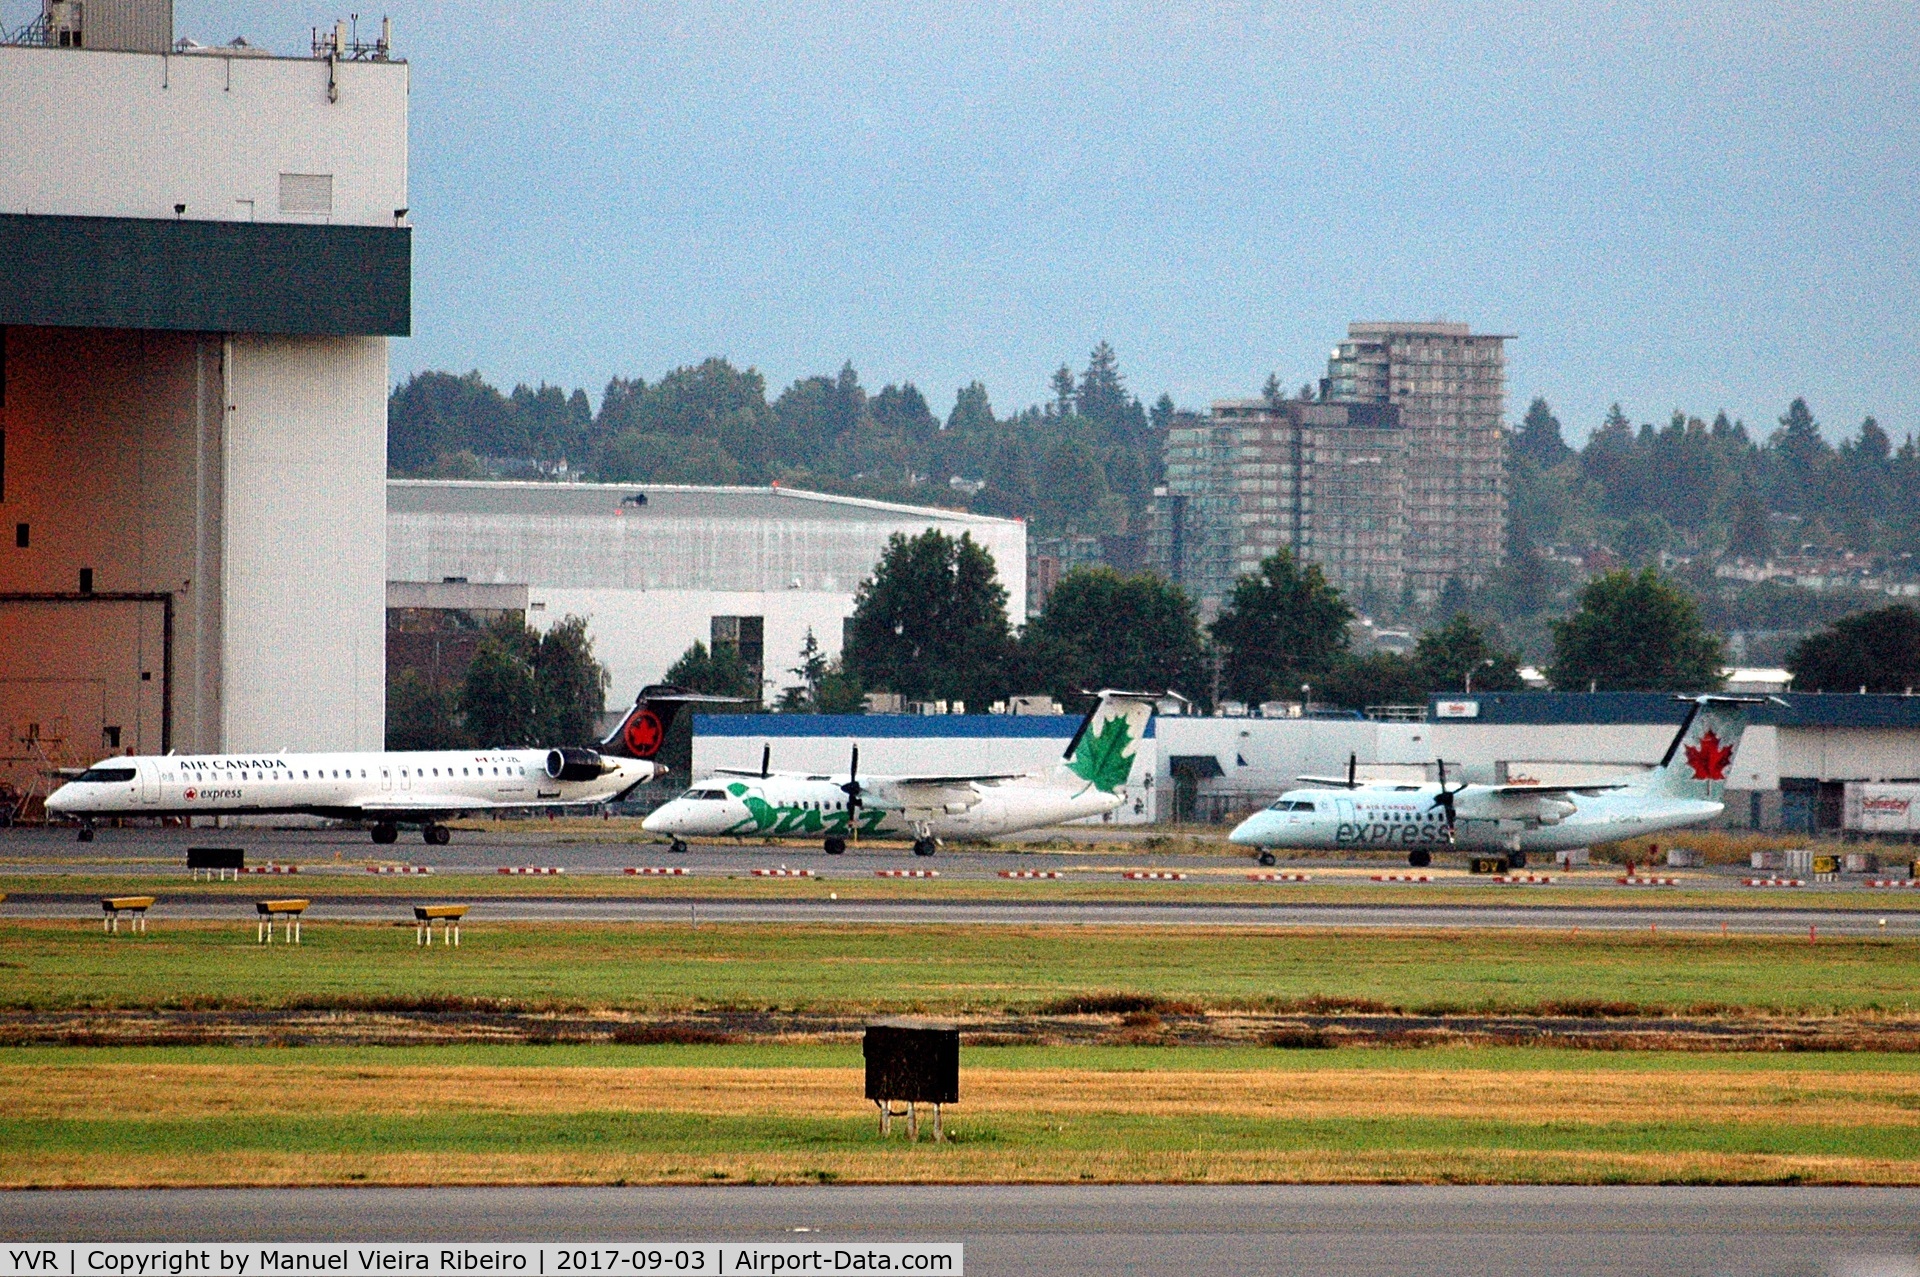 Vancouver International Airport, Vancouver, British Columbia Canada (YVR) - Three different liveries for AC Express/Jazz